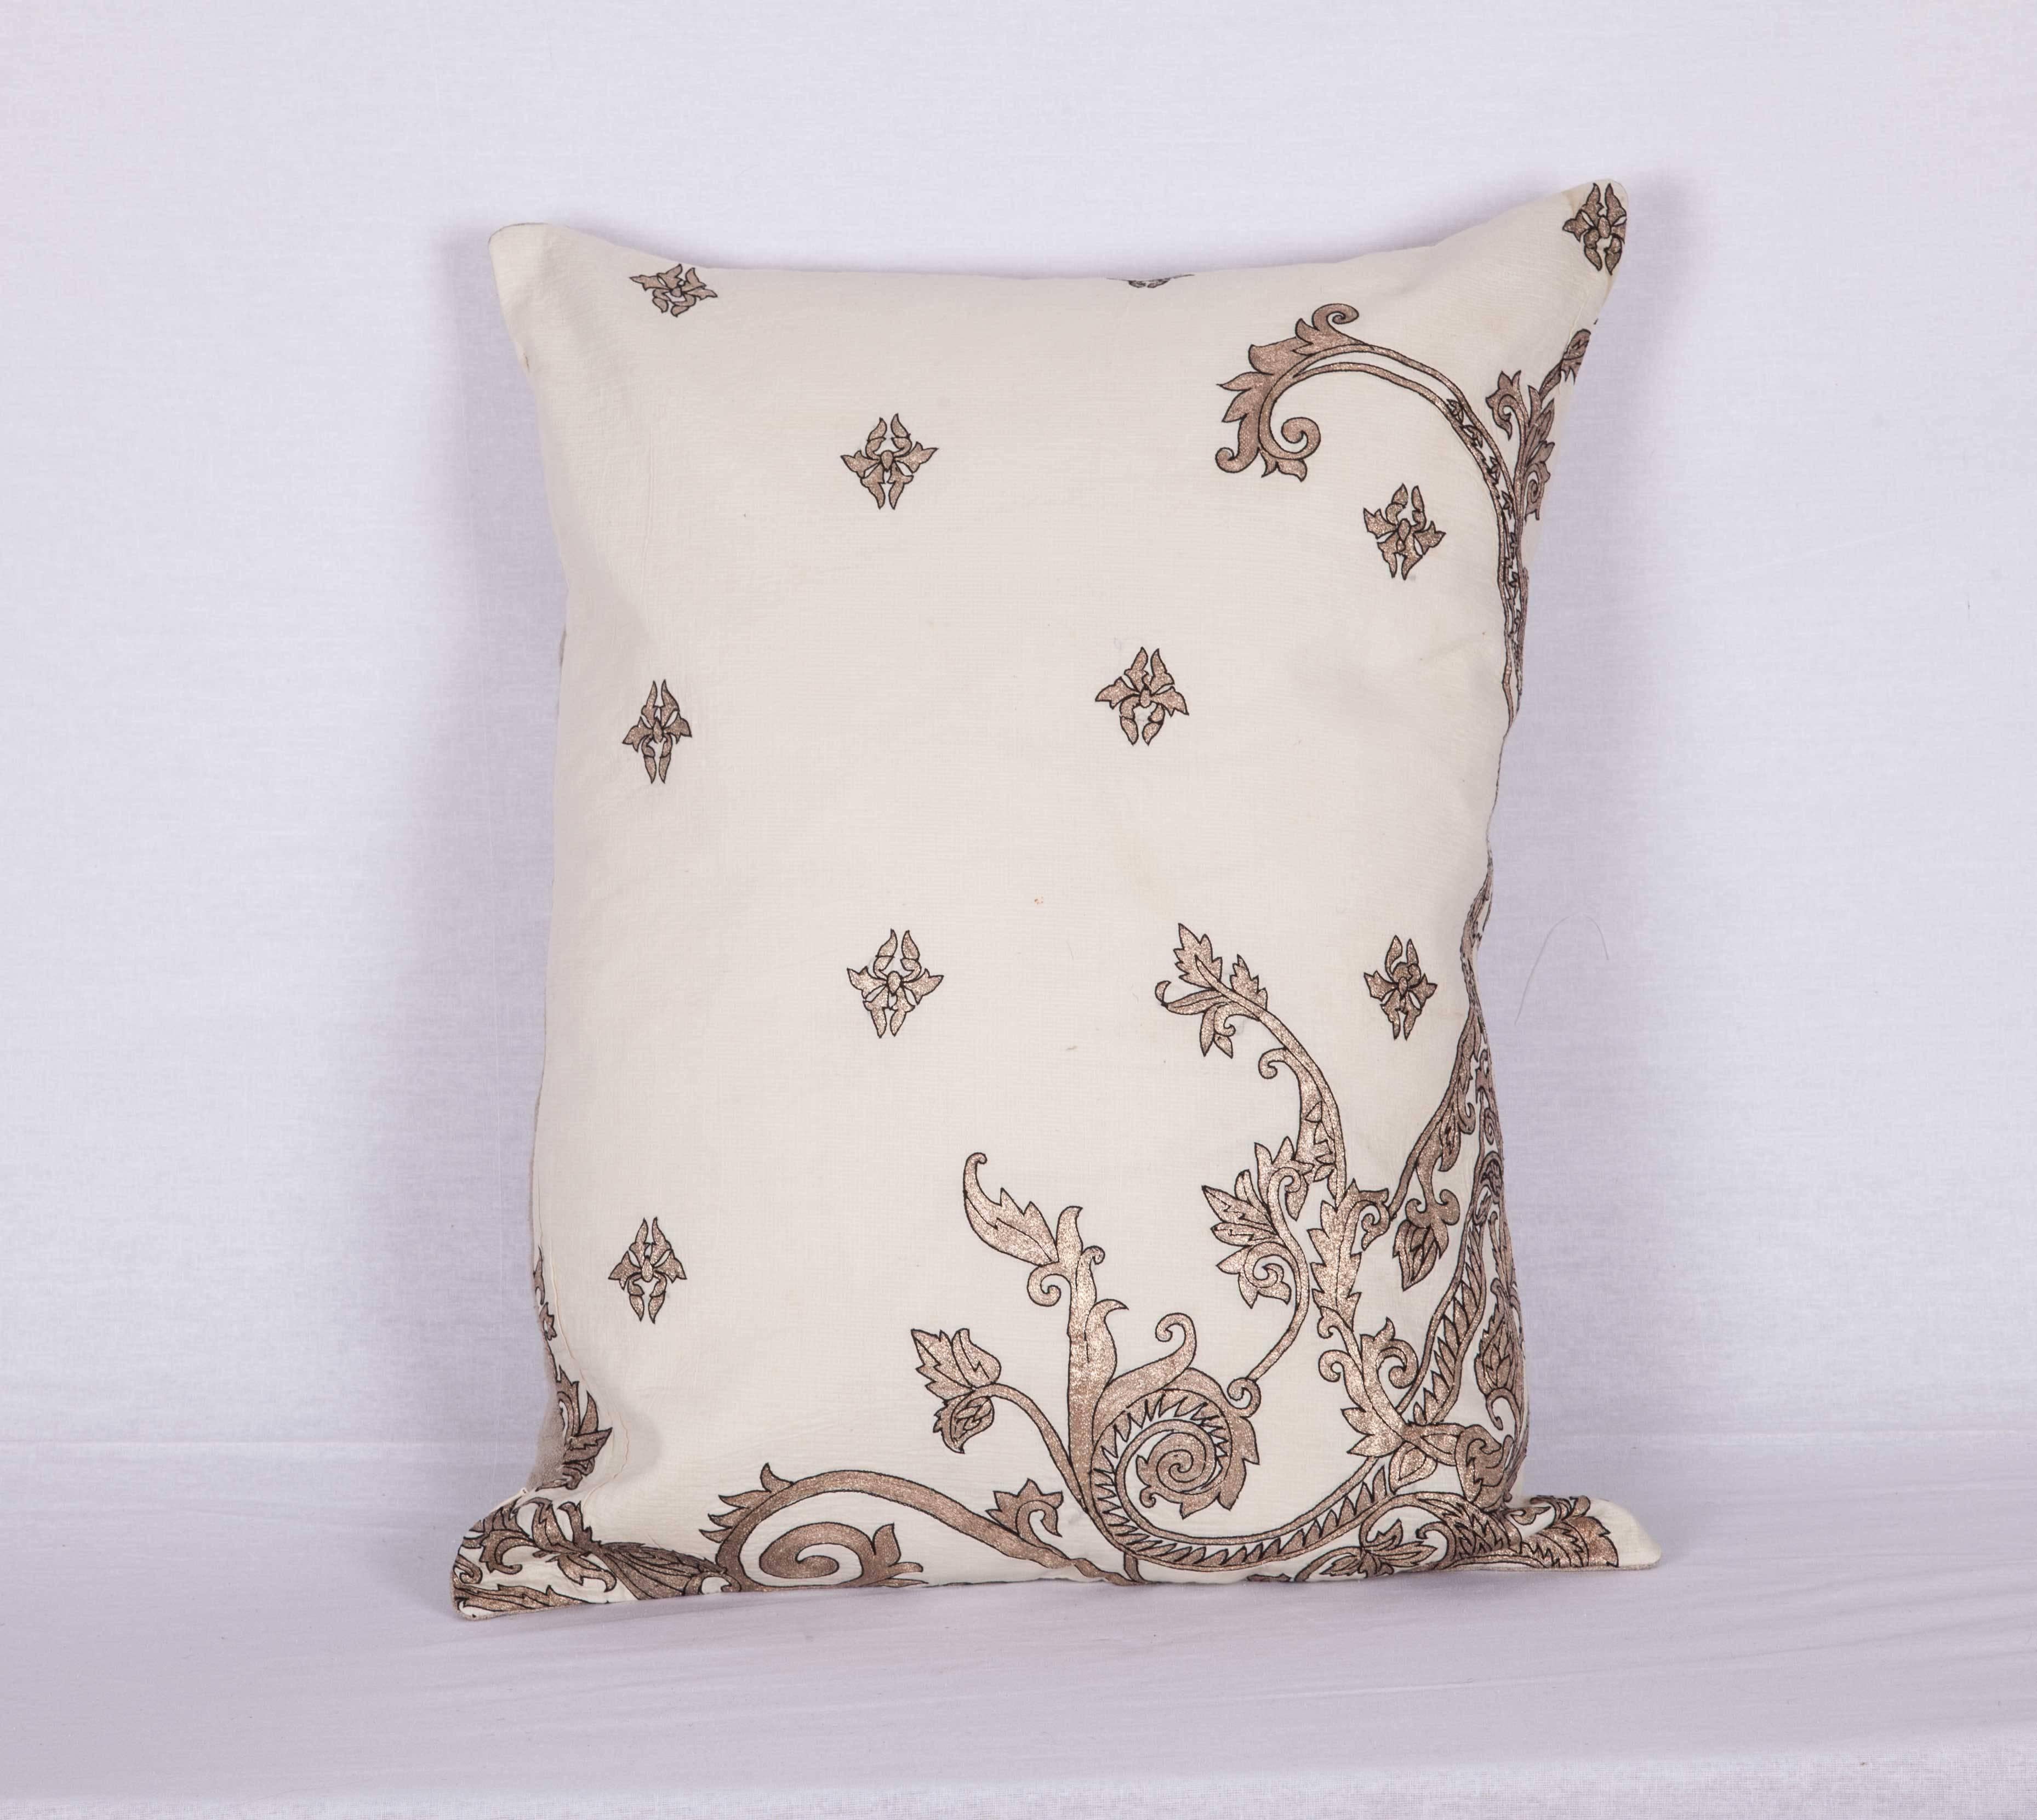 The pillow is made out of a 19th century or earlier European silver embroidery. It does not come with an insert but it comes with a bag made to the size and out of cotton to accommodate the filling. The backing is made of linen. Please note '